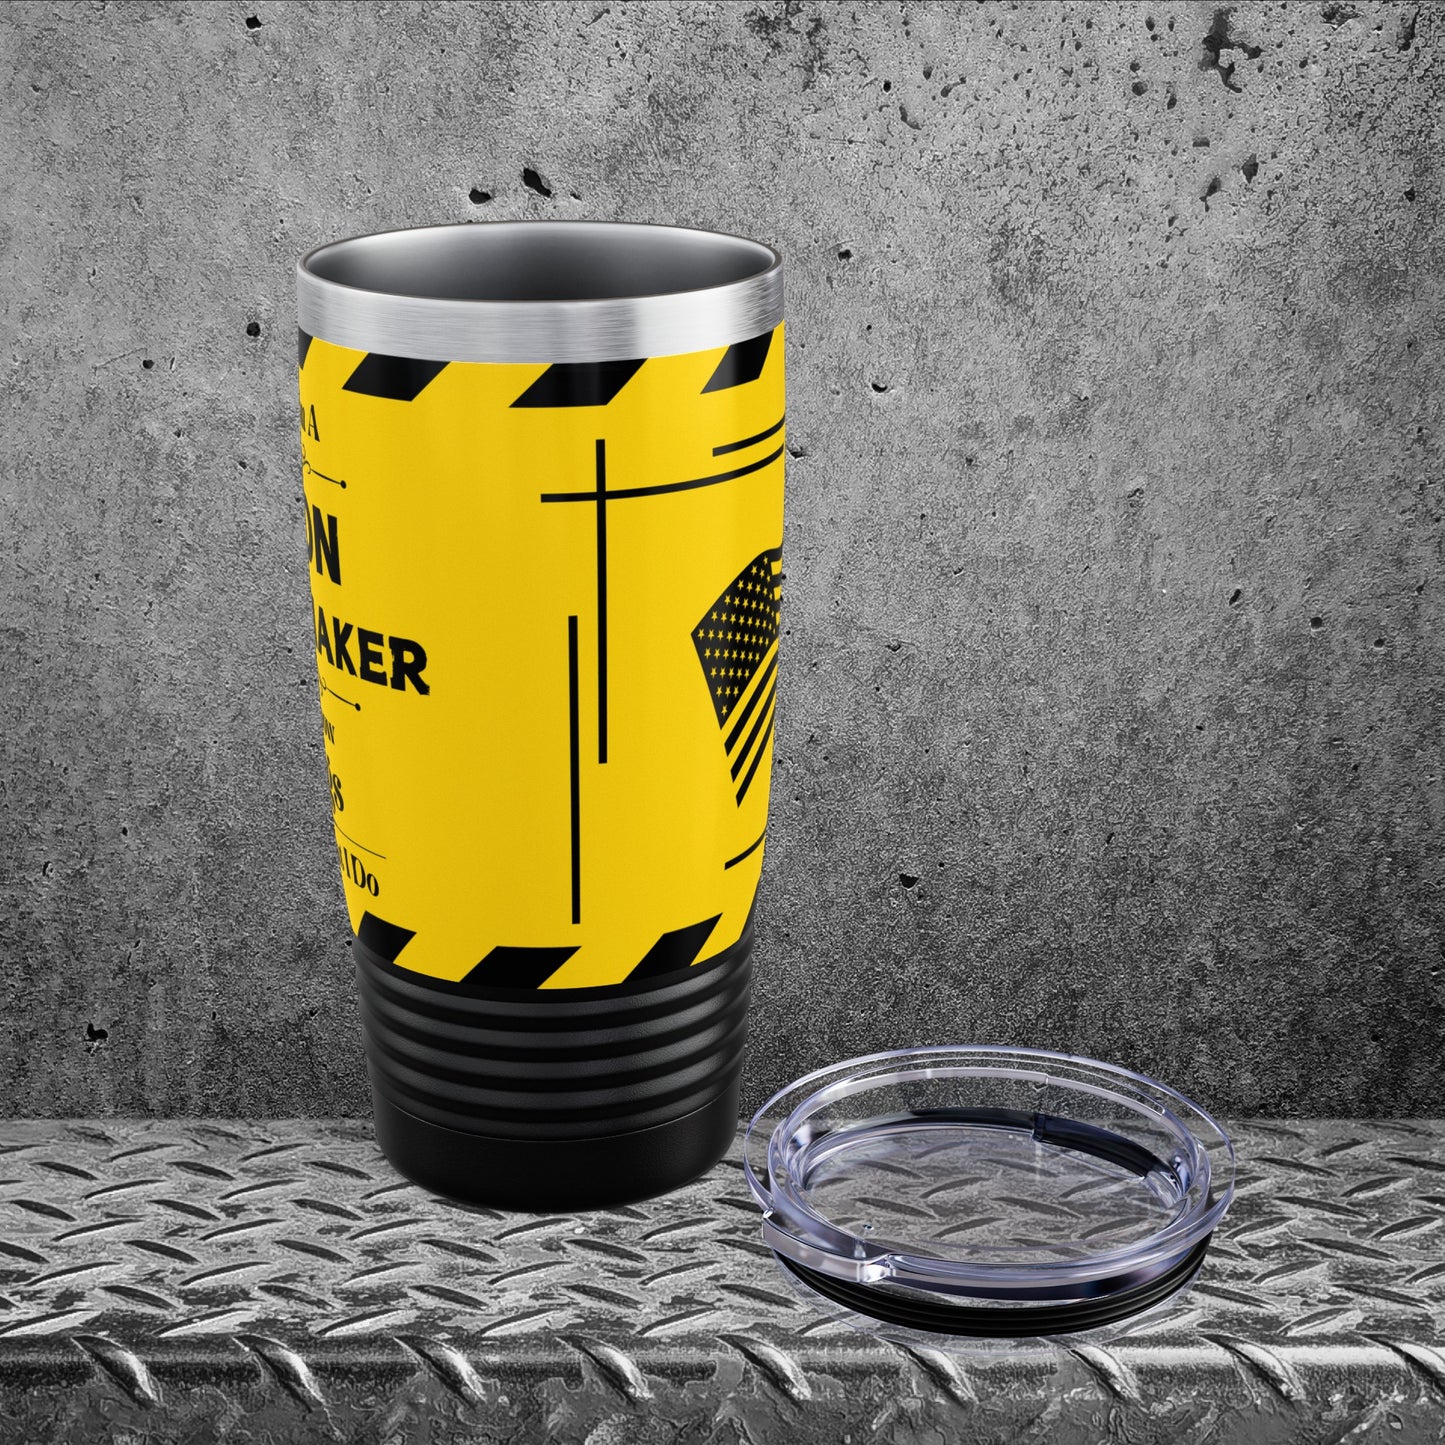 Relax, I'm A Union Boilermaker, And I Know Things - Ringneck Tumbler, 20oz